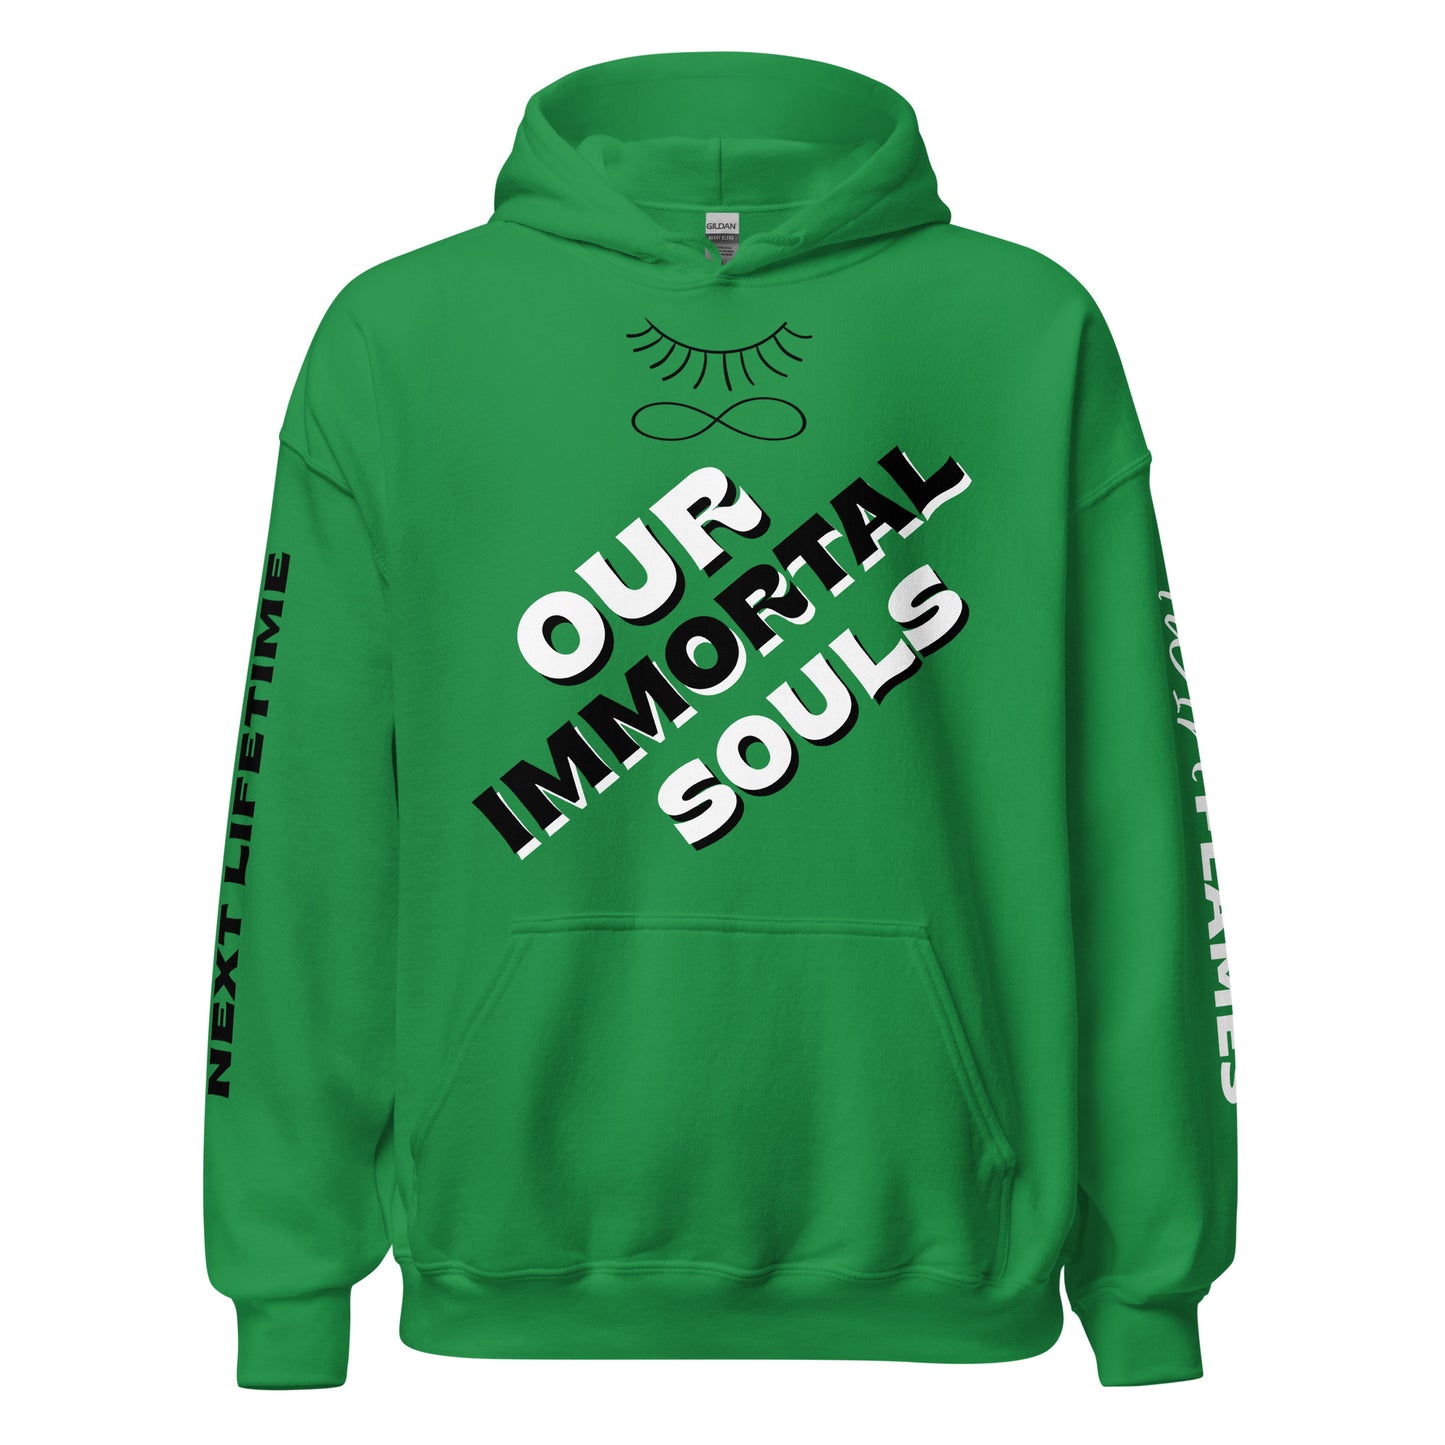 Hoodies custom print. Hoodies with designs and text on front, back, left, and right sleeves. Unisex graphic hoodies. Hoodies custom logo. Unisex clothing for both sexes with quotes. Irish green sweatshirt with double lined hood, pouch pocket, and rib-knit cuffs. Black closed eye and infinity symbol brand logo with white and black text "Our Immortal Souls" mystical, supernatural mantra on the front. Made from cotton/polyester blend. Sizes S-3X. JAMILLIAH'S WISDOM IS TIMELESS SHOP - wisdomistimeless.com.